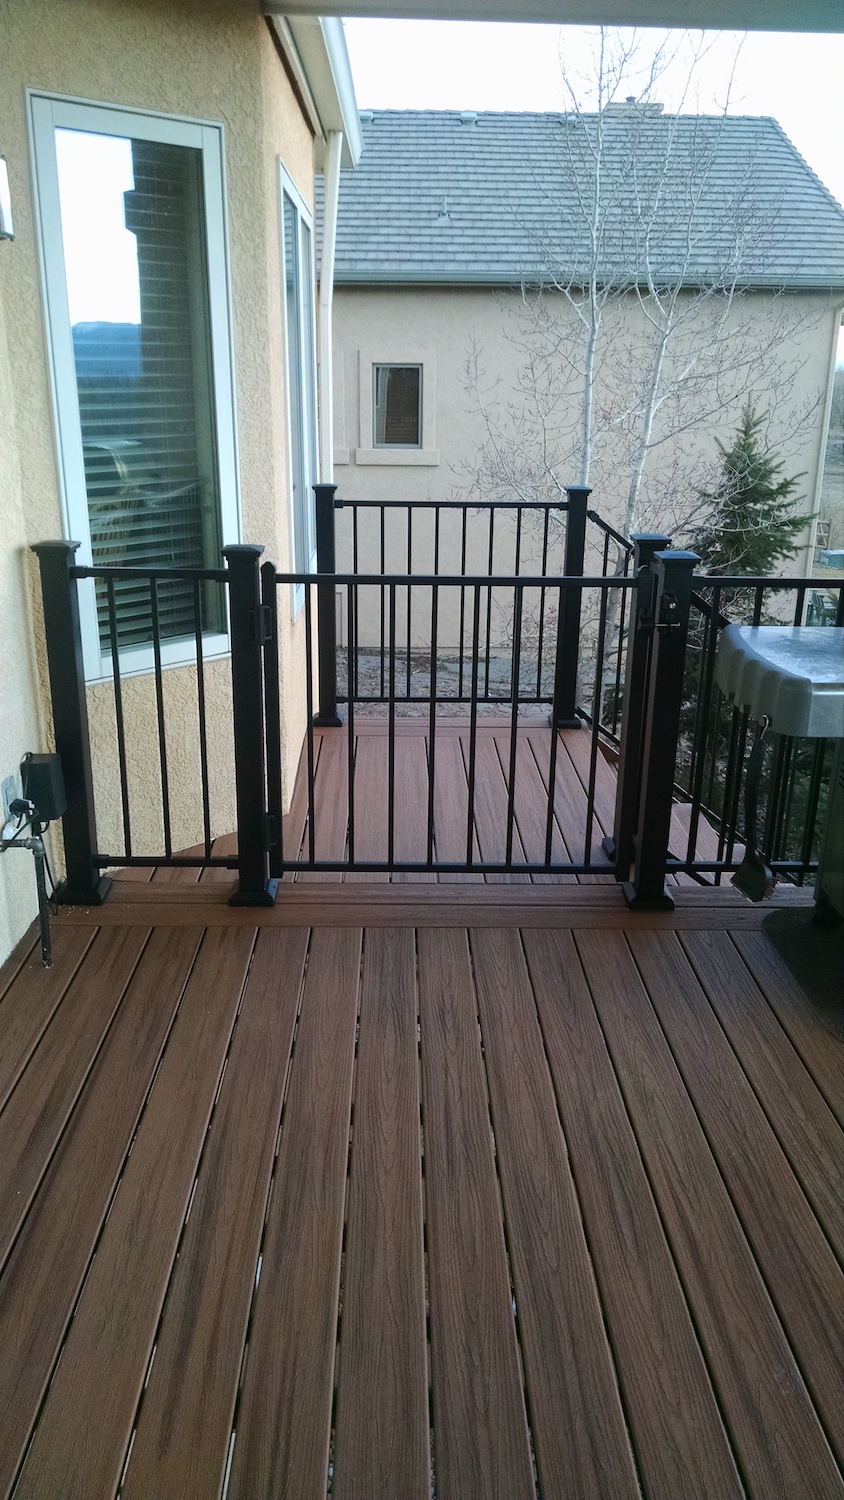 Composite deck with a gate at the top of the stairs for safety